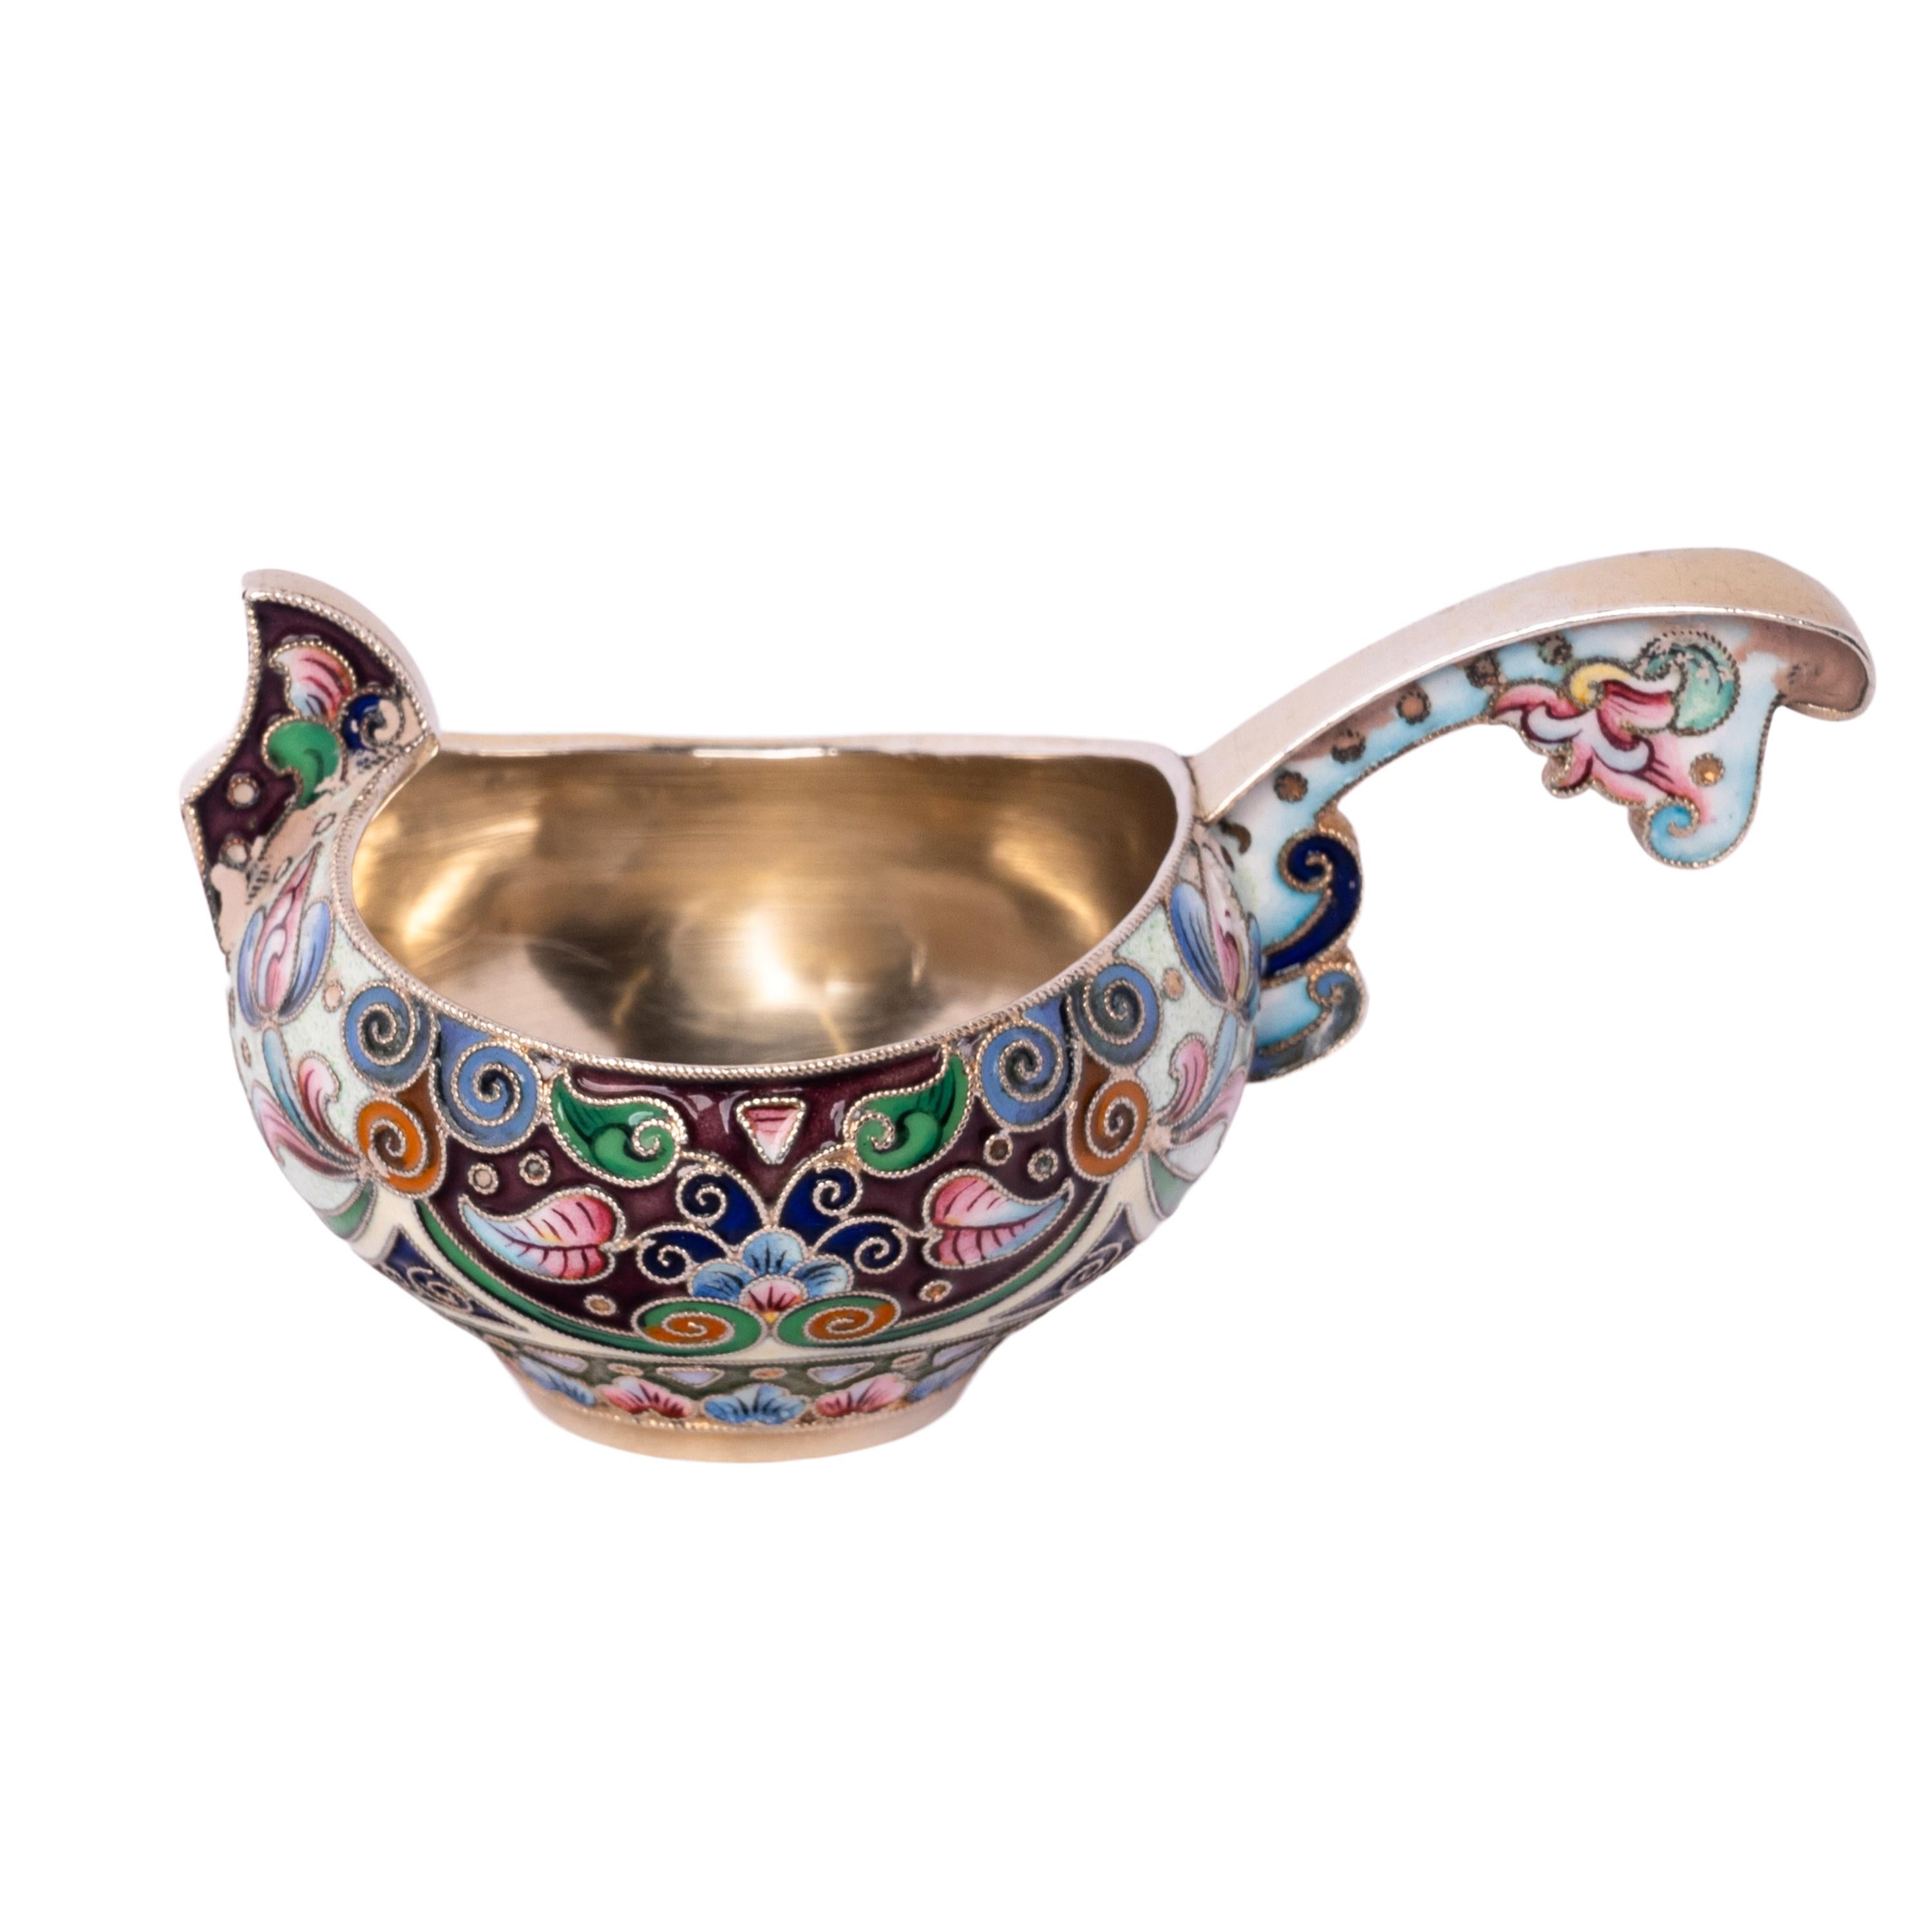 A very fine antique silver gilt and cloisonne enamel Imperial kovsh, 6th Artel, Moscow, 1908-1917.
The 6th Artel was possibly the most famous in Russia and was the supplier to the Imperial Court of very high quality enameled silver, often designed